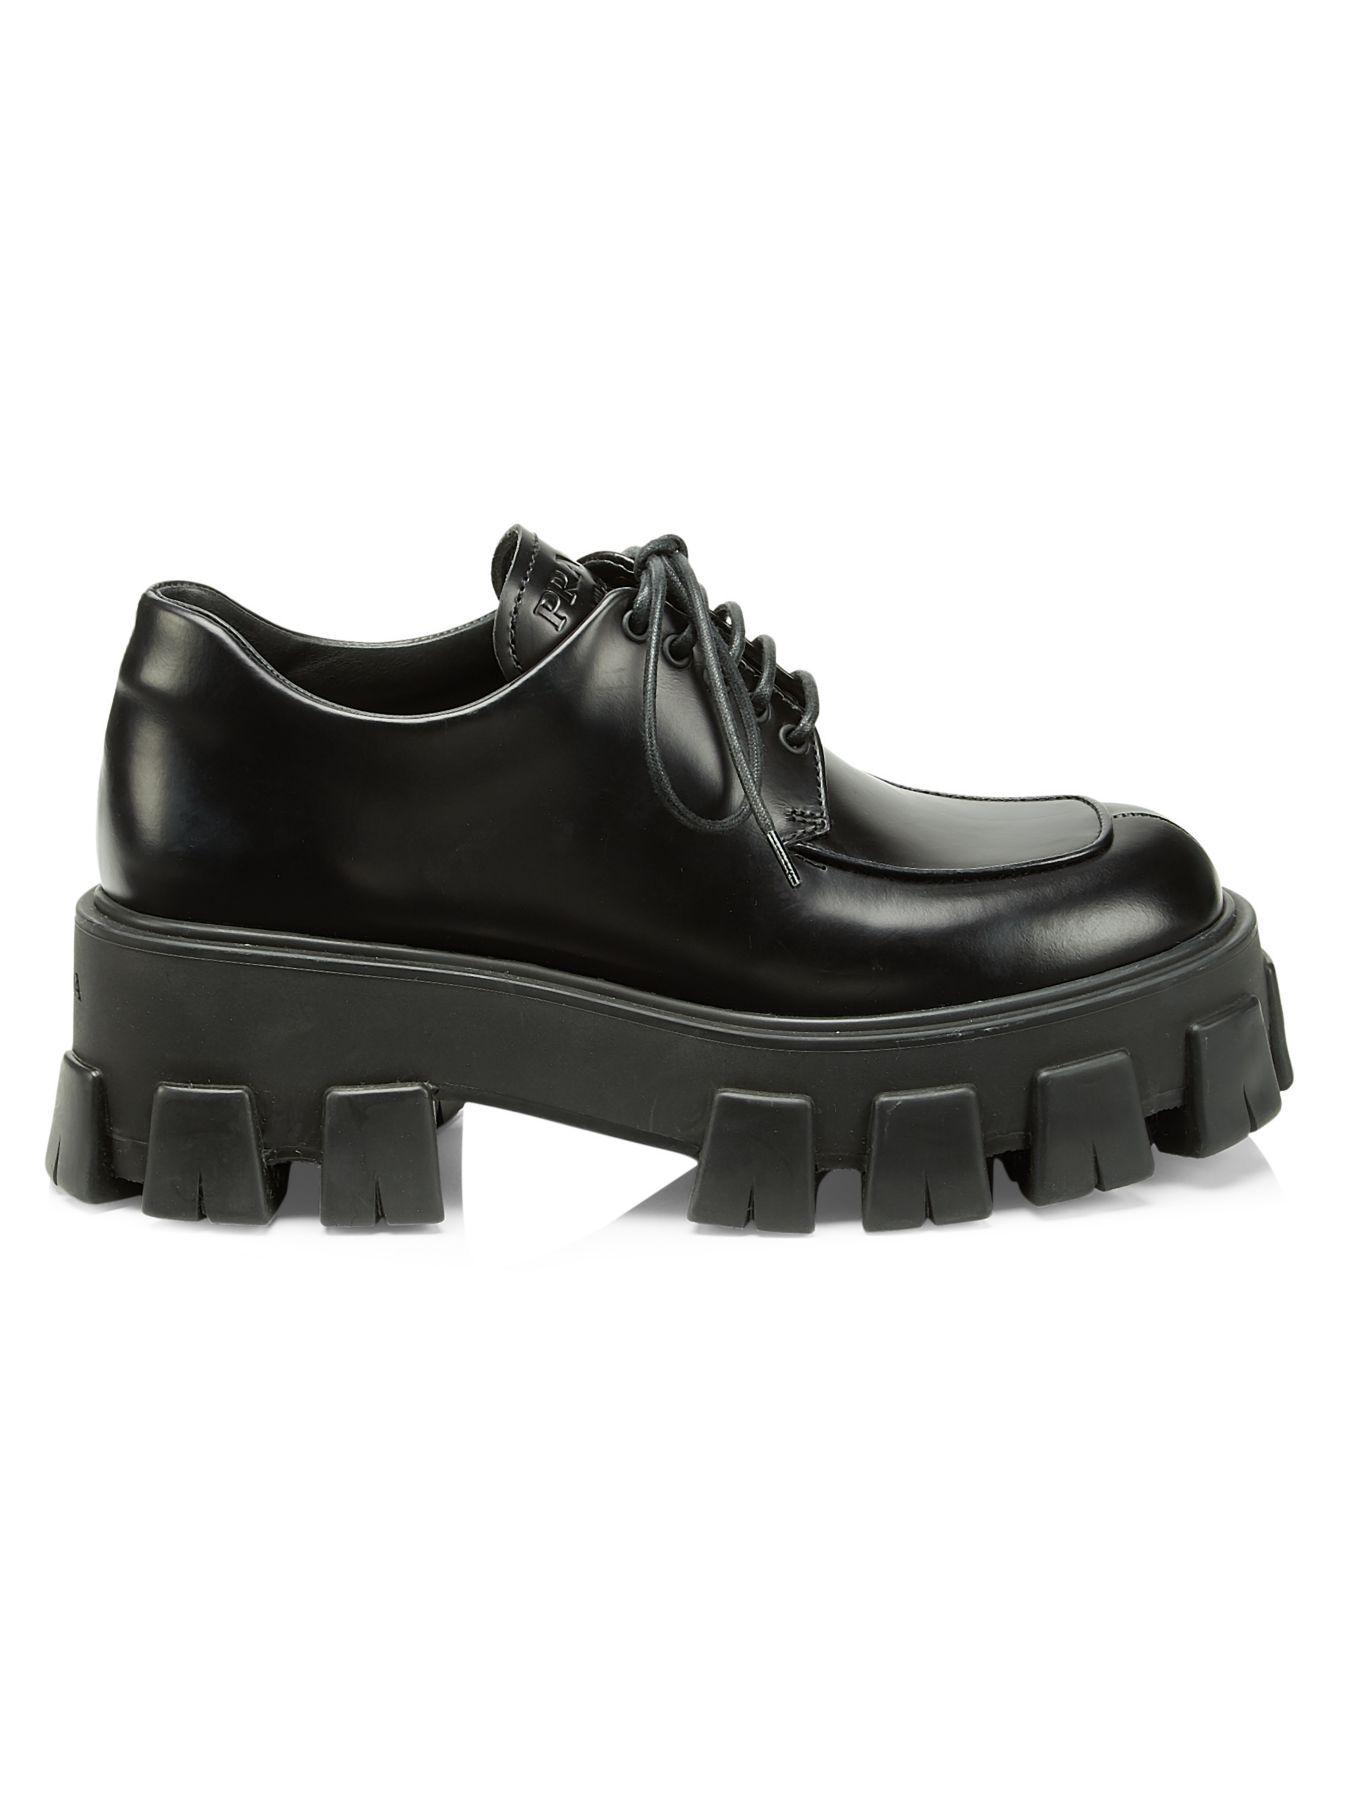 Booted Creepers: Prada Creepers Boot - Shoe Effect